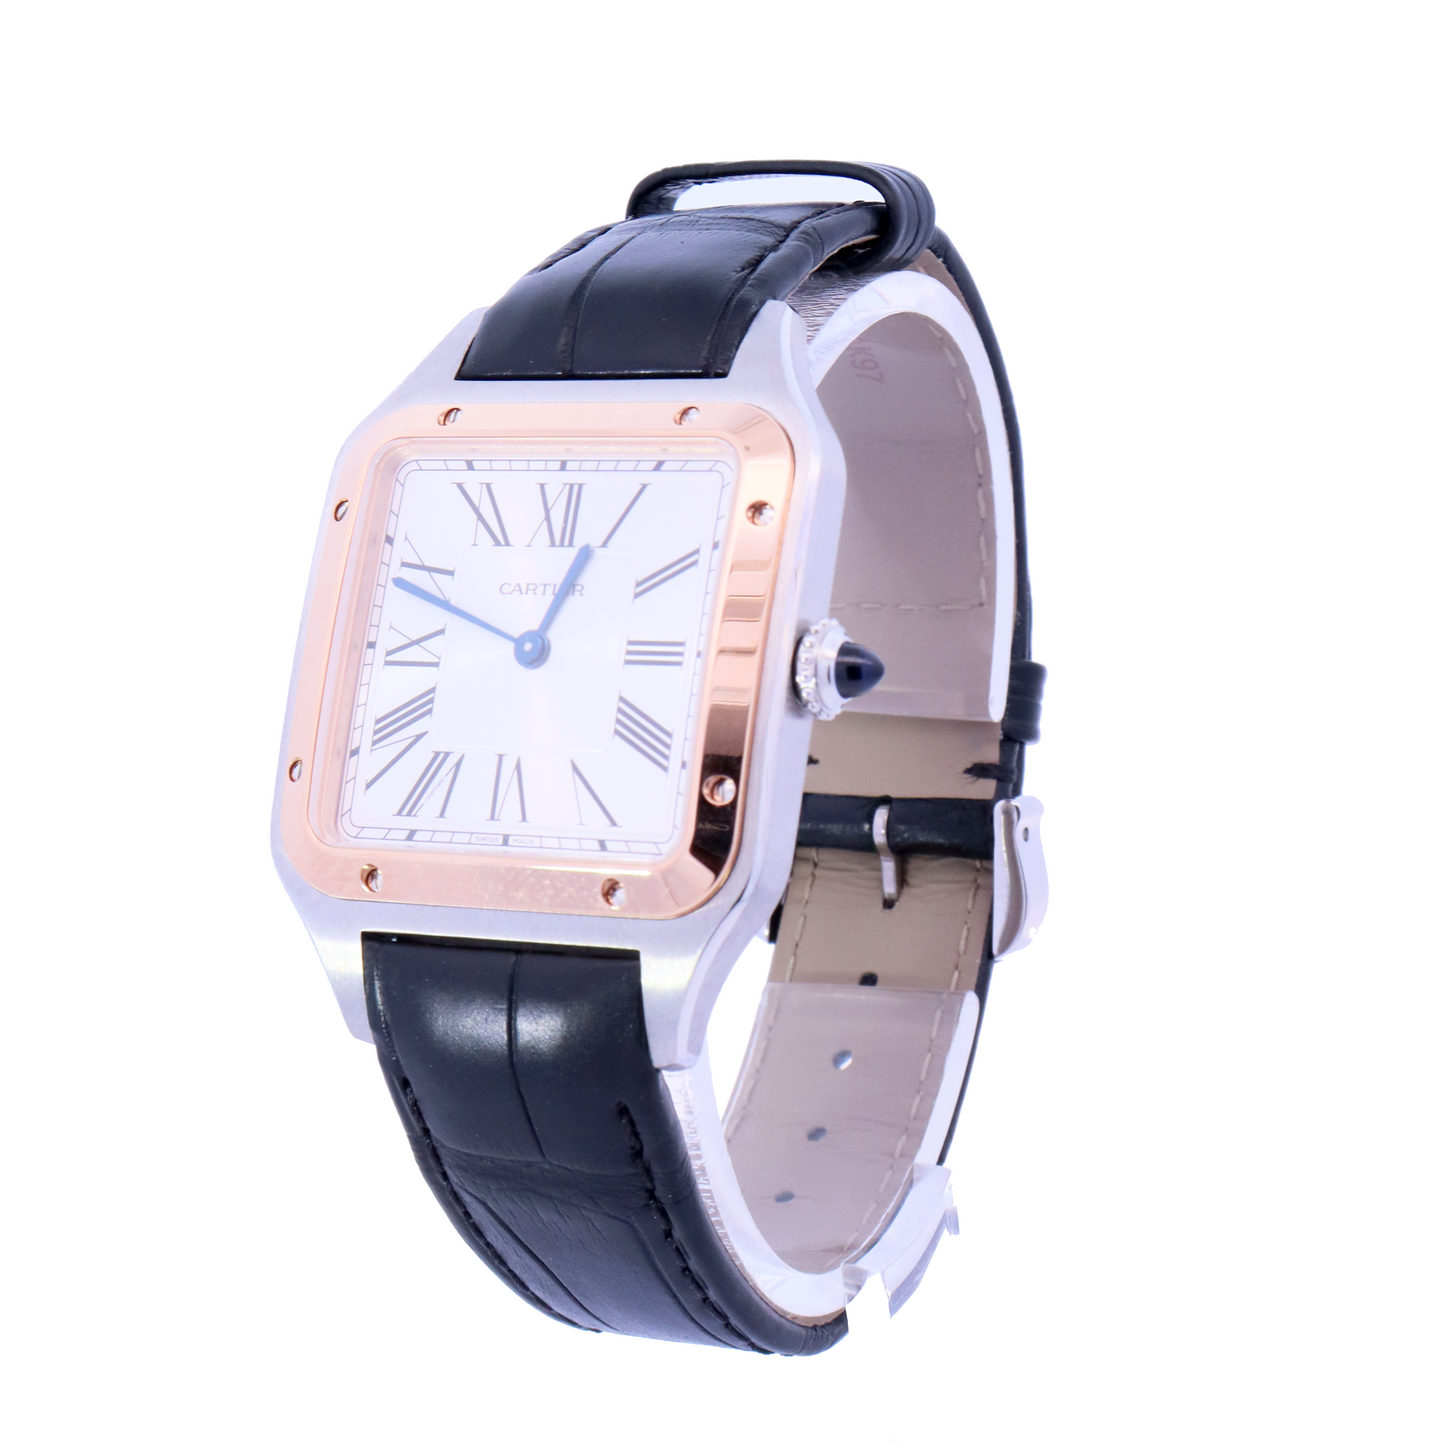 Cartier Santos Dumont Rose Gold and Stainless Steel 31mm White Roman Dial Watch | Ref# W2SA0011 - Happy Jewelers Fine Jewelry Lifetime Warranty